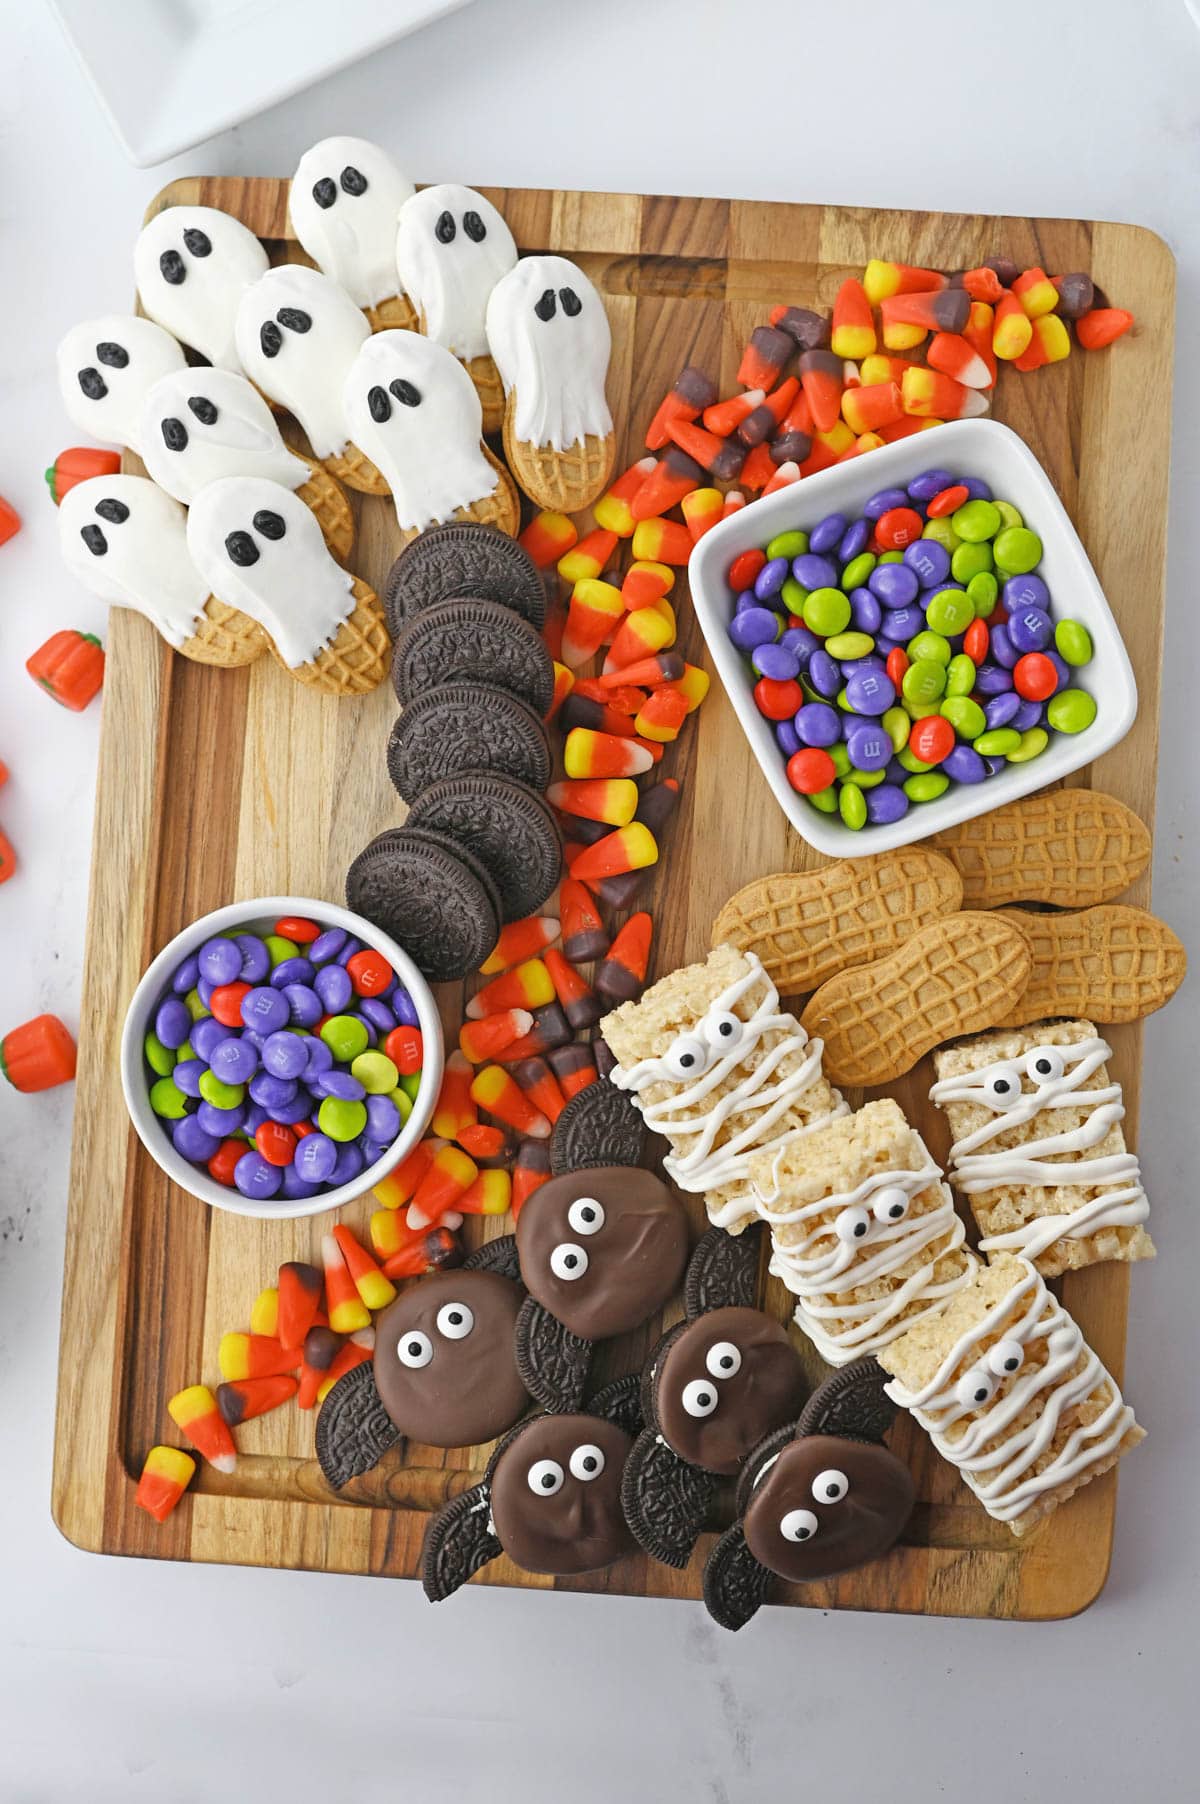 Candy board with cookie ghosts, Oreo bats and more